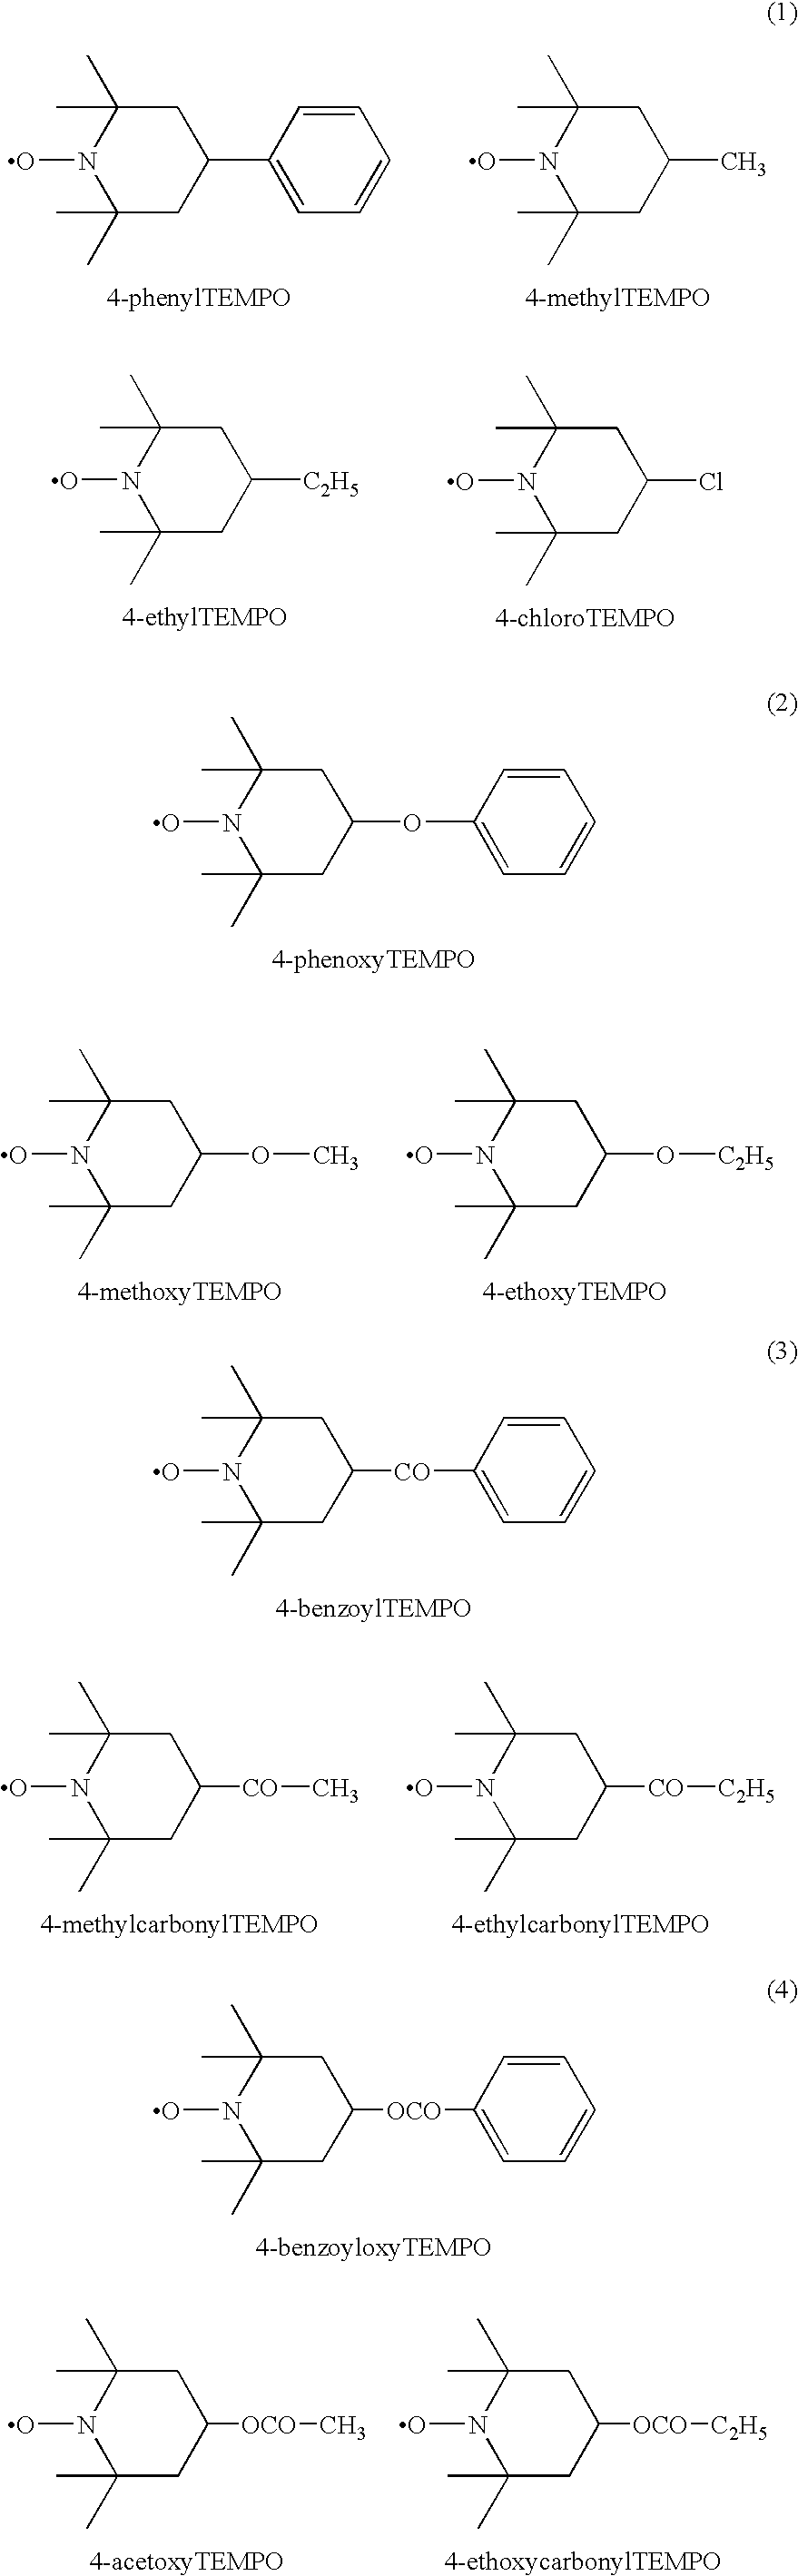 Modified diene-based rubber and rubber composition containing the same